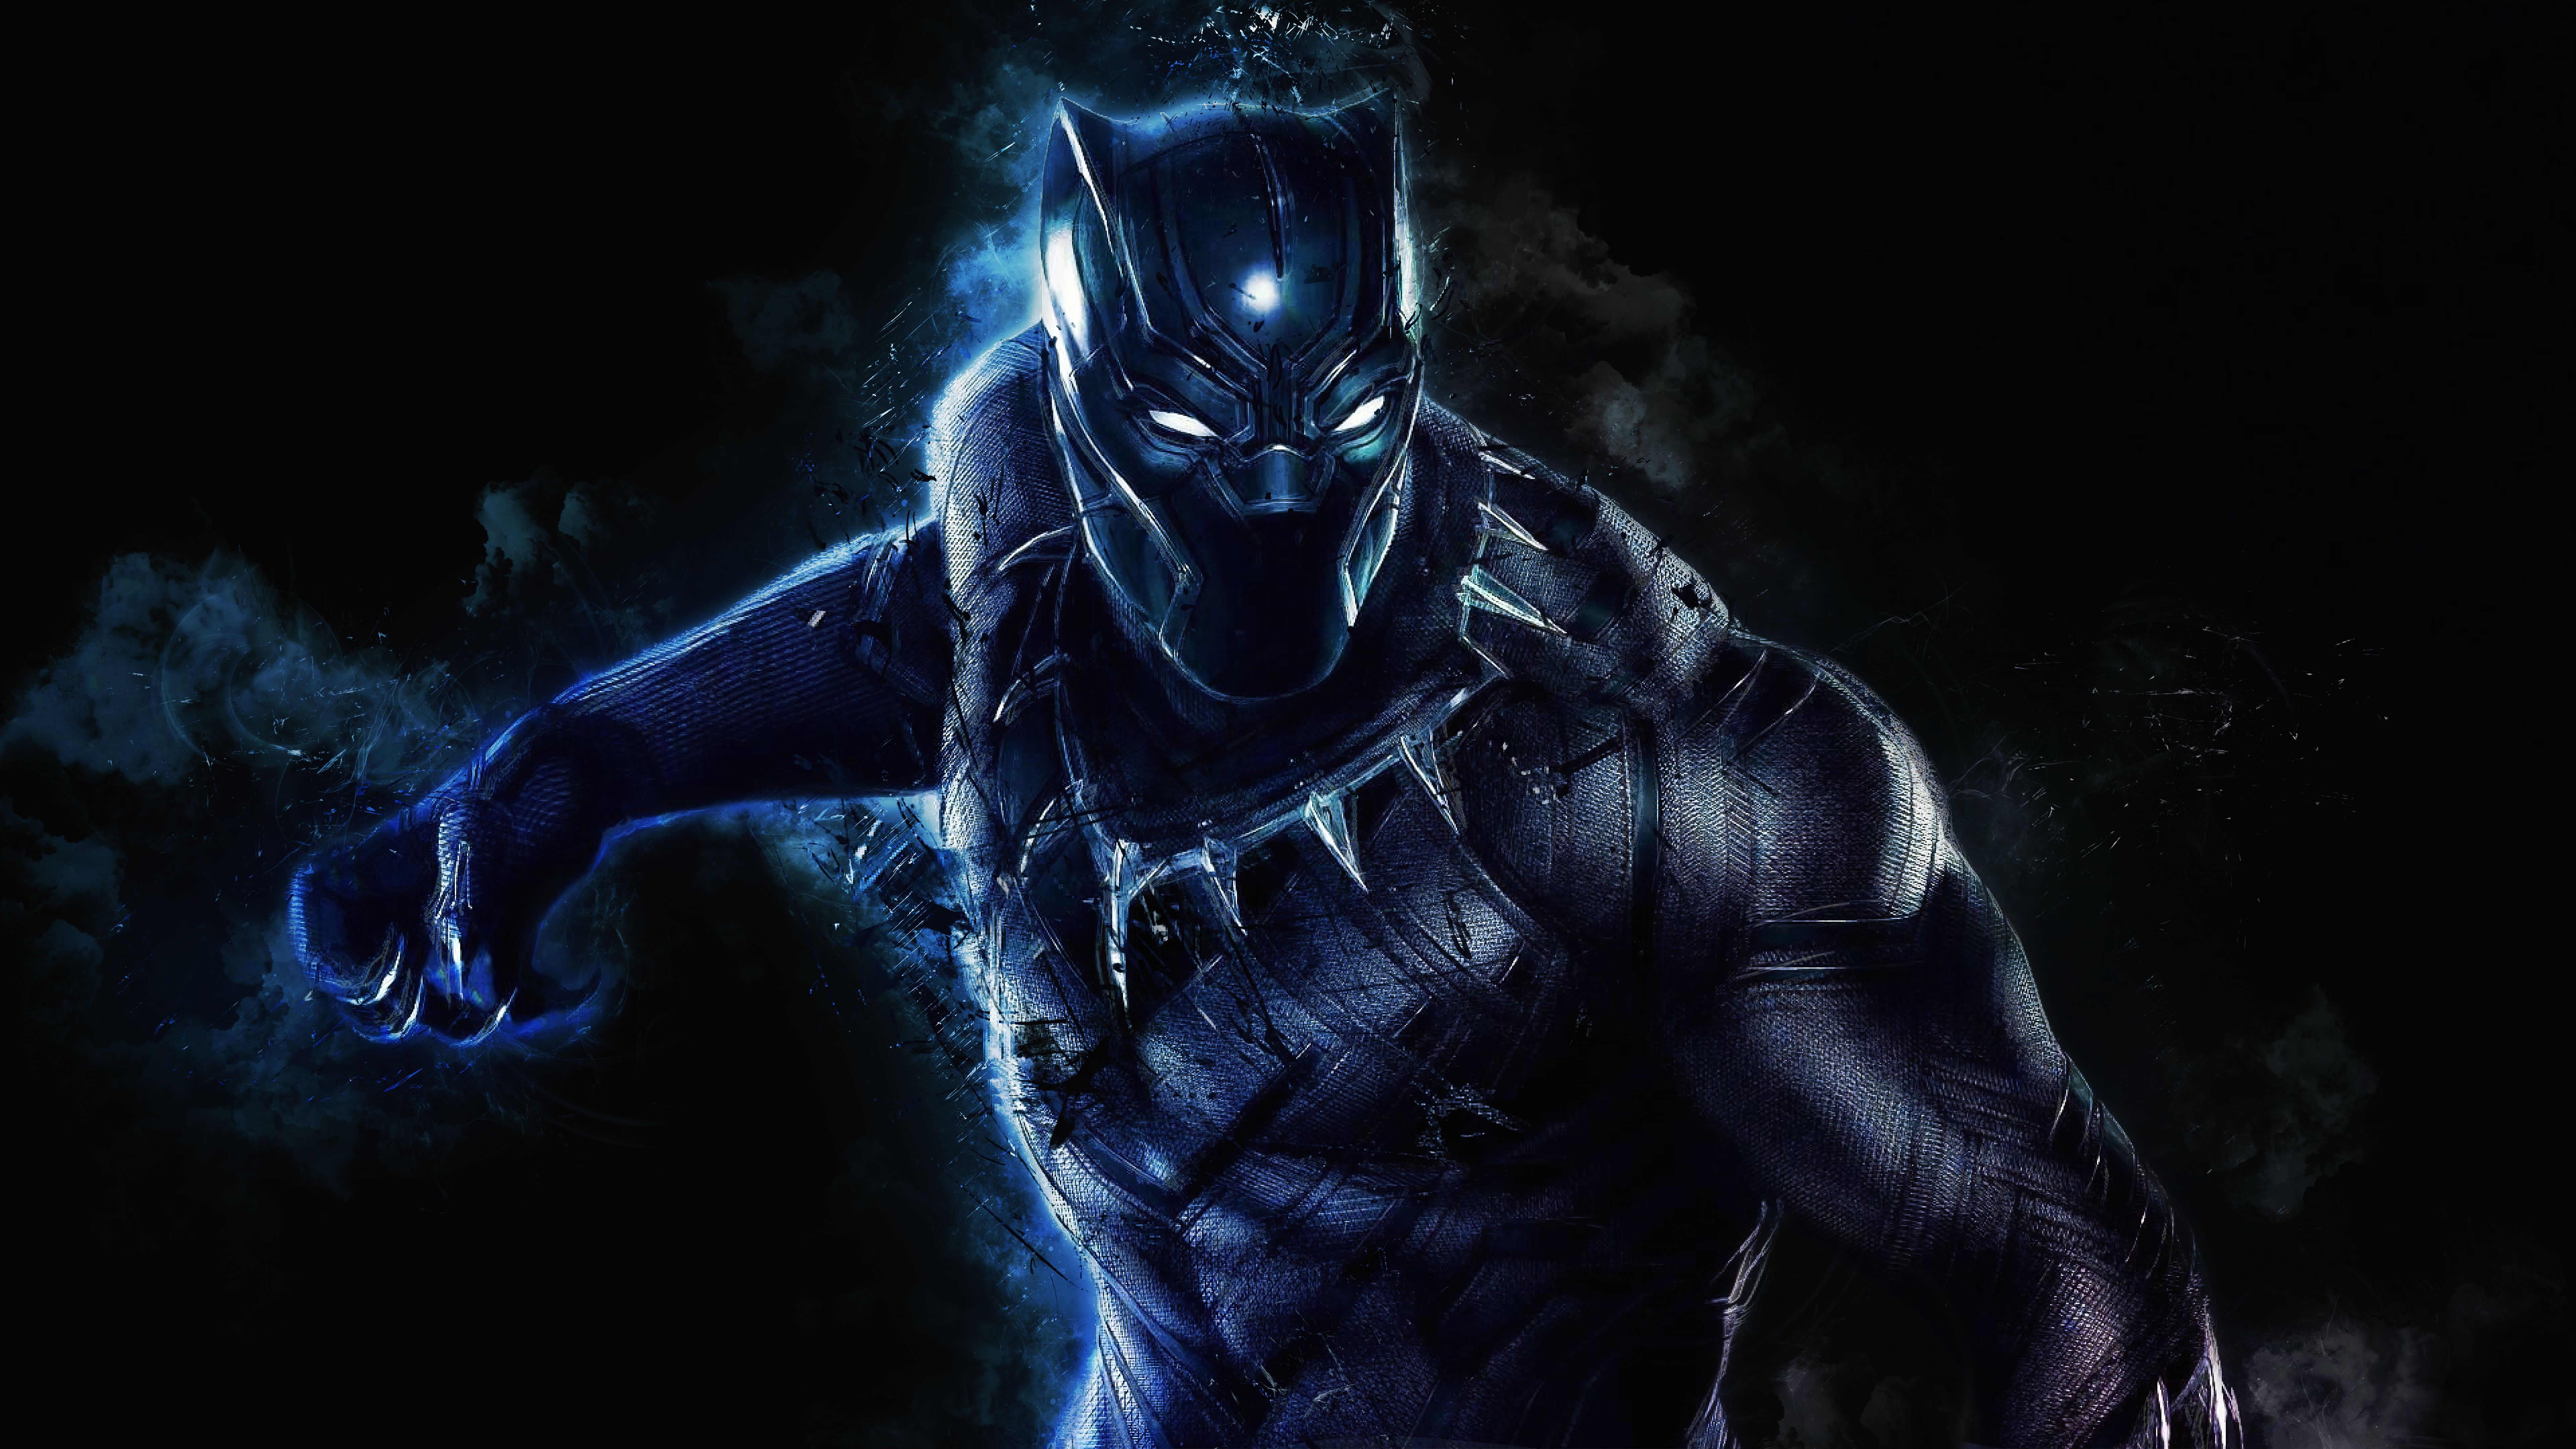 🔥 Download Cool Black Panther Wallpaper Top by @lbryant81 | Cool